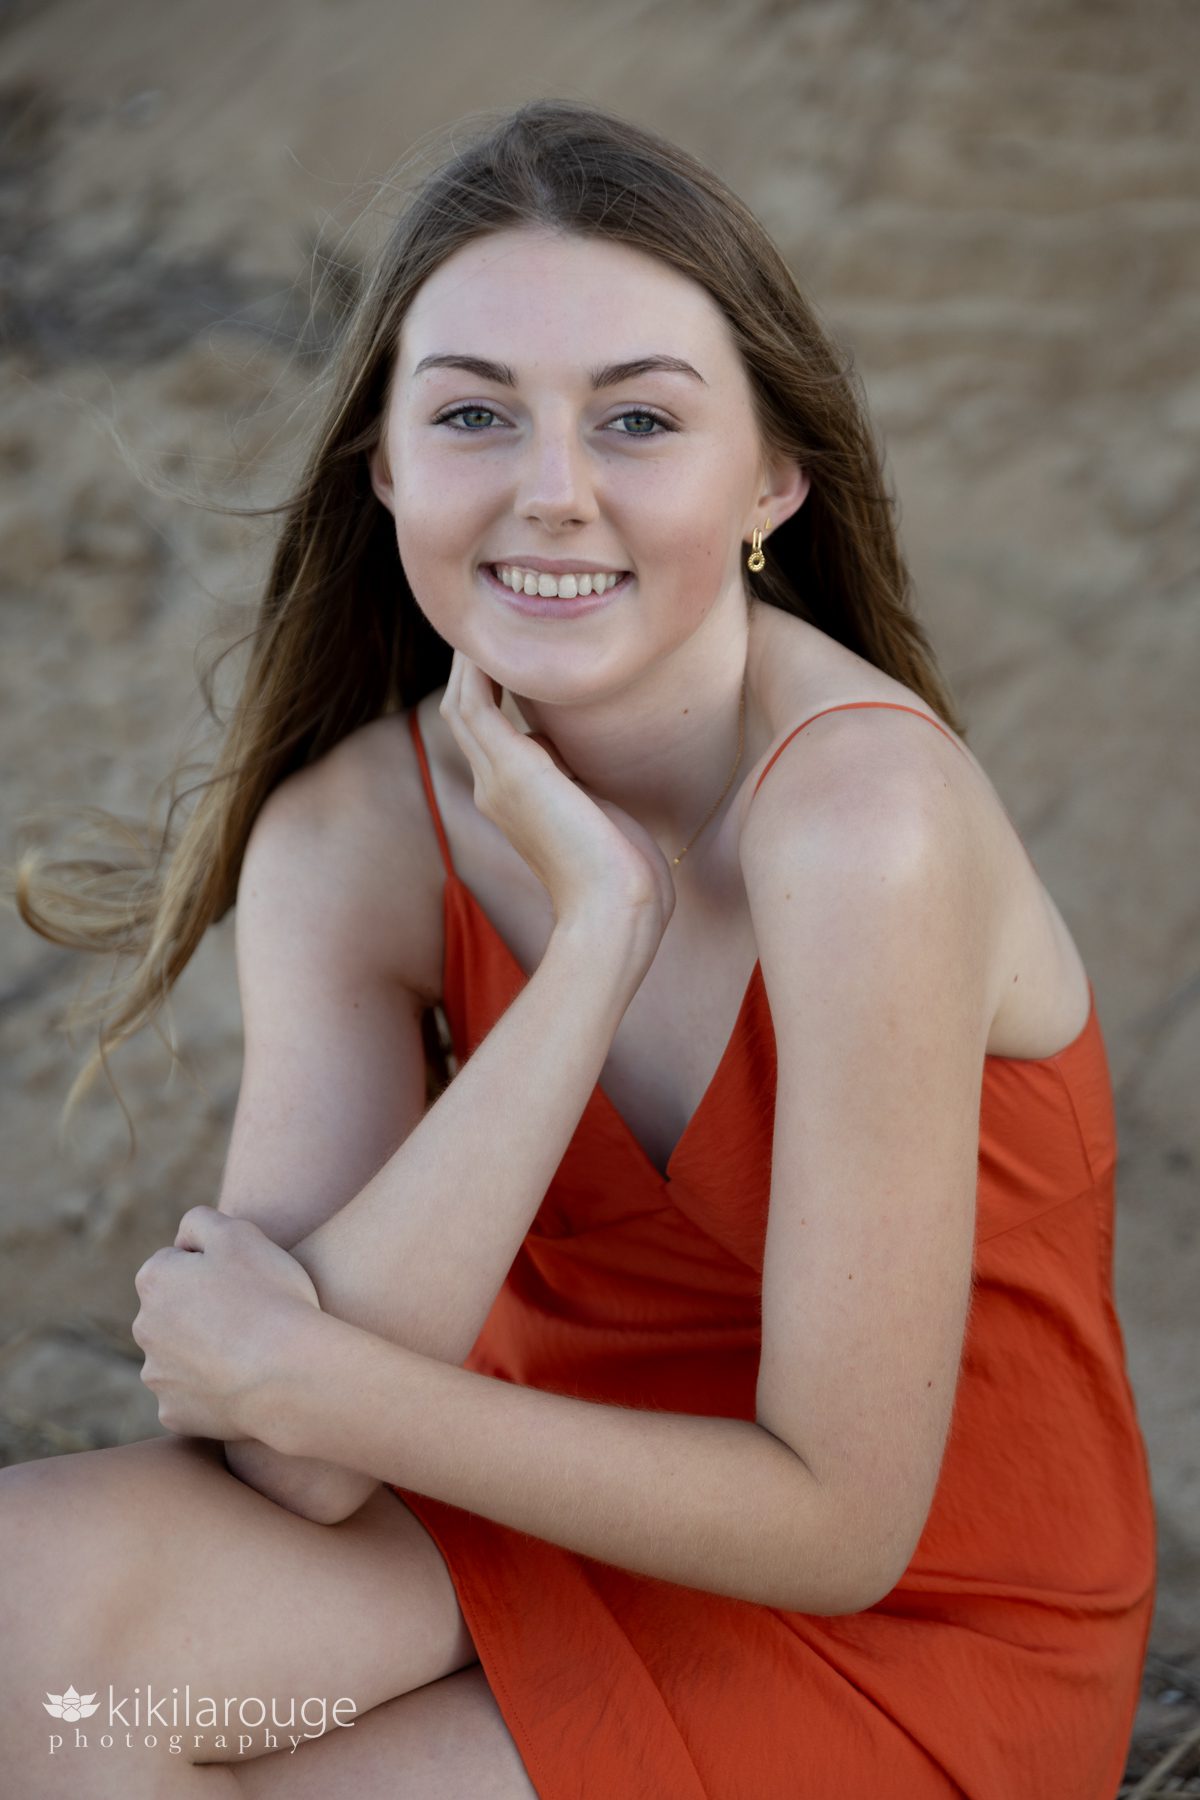 Teen girl in orange spaghetti strapped dress sitting in beach dune with hand under her neck